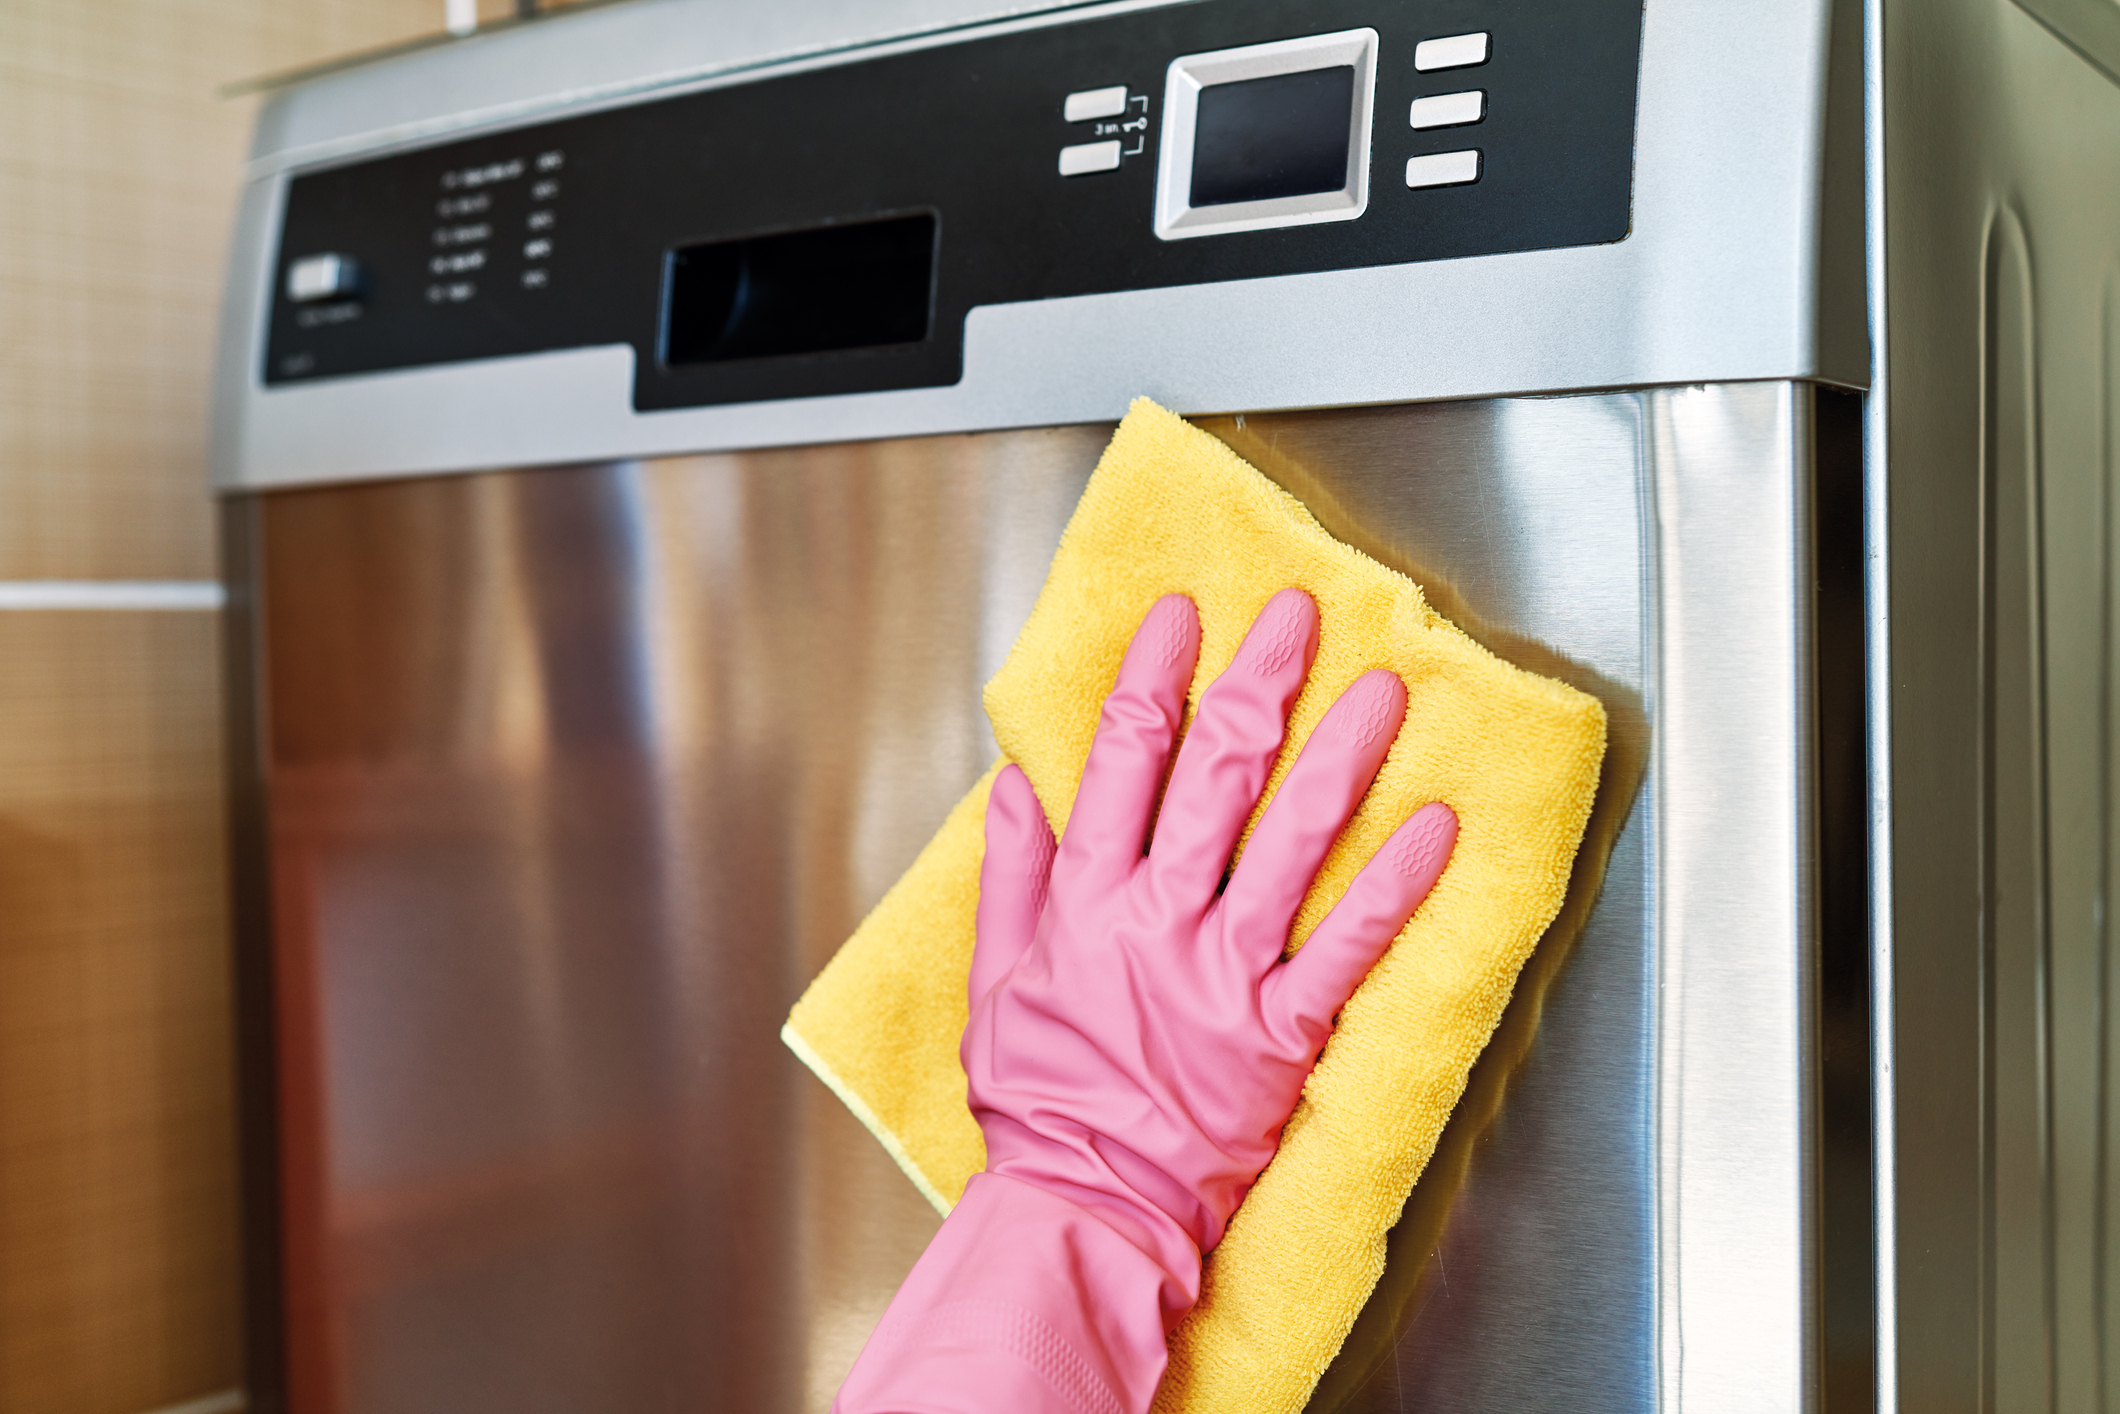 How to clean stainless steel appliances: for a gleaming finish